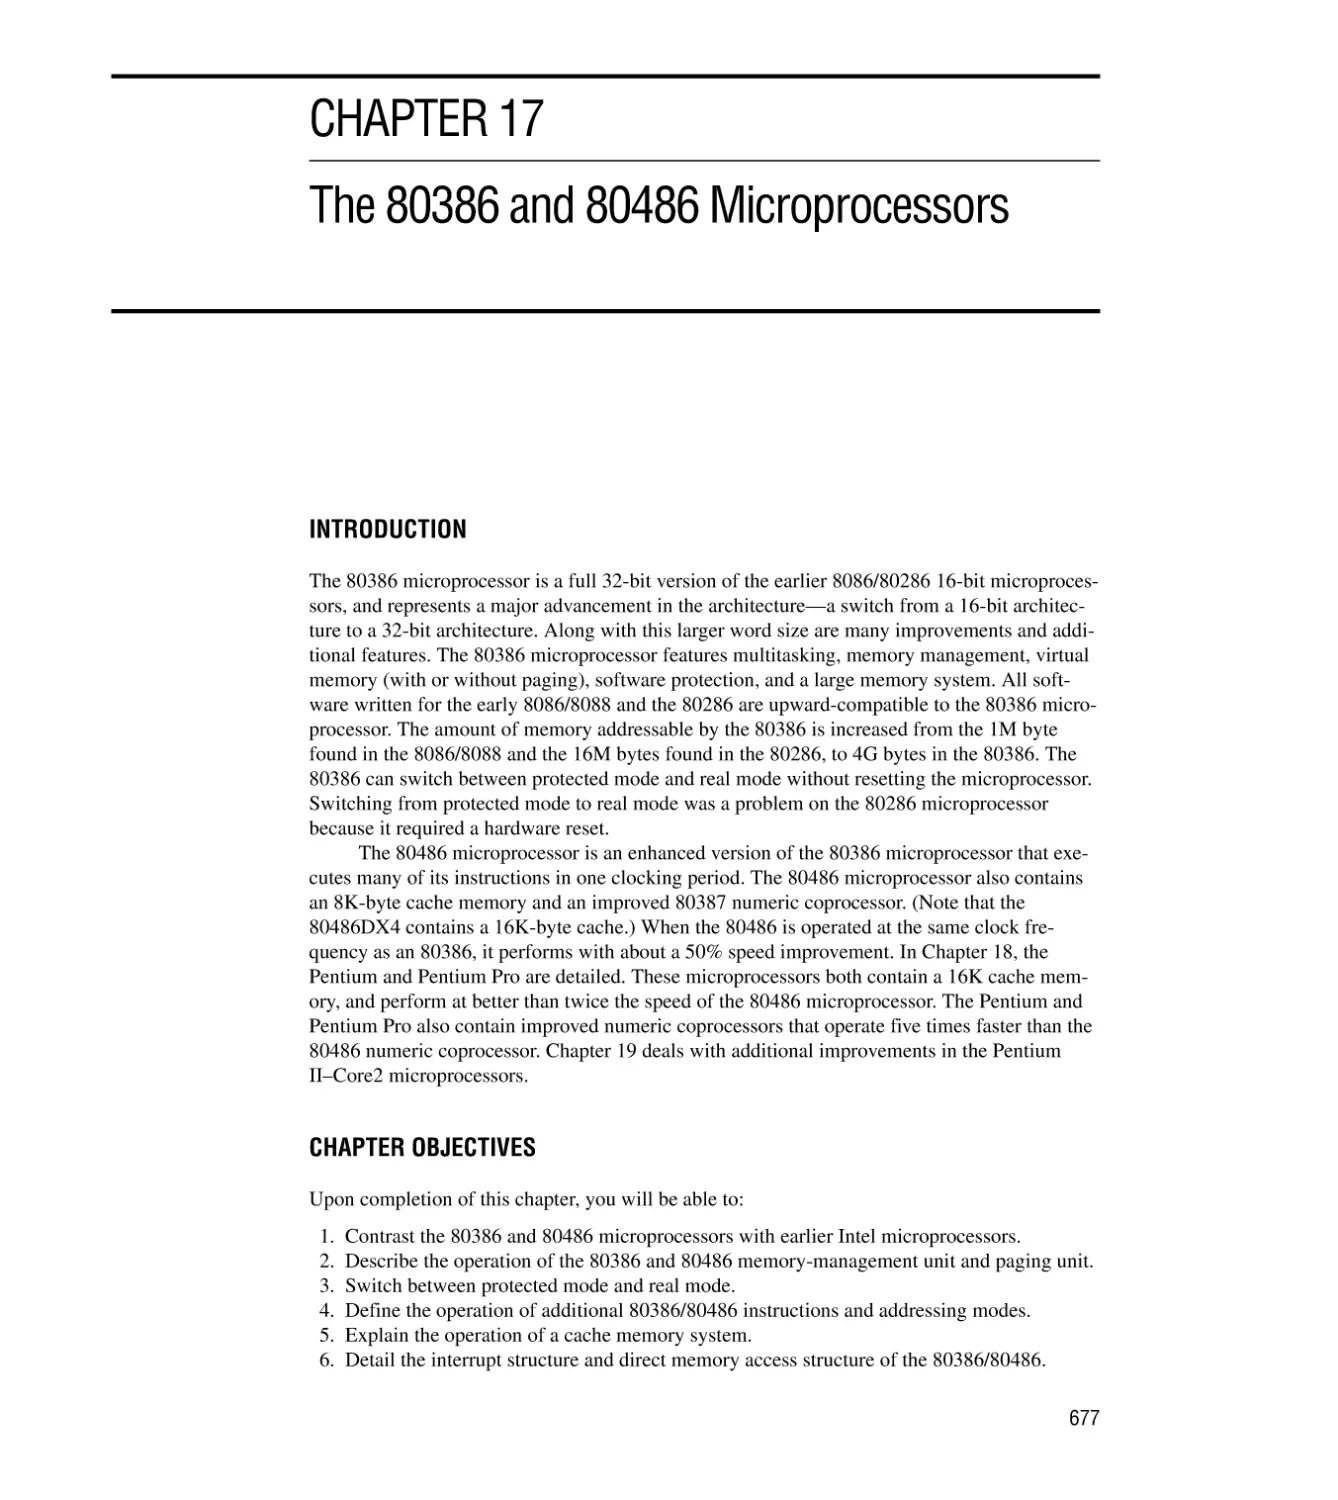 CHAPTER 17 THE 80386 AND 80486 MICROPROCESSORS
Introduction/Chapter Objectives